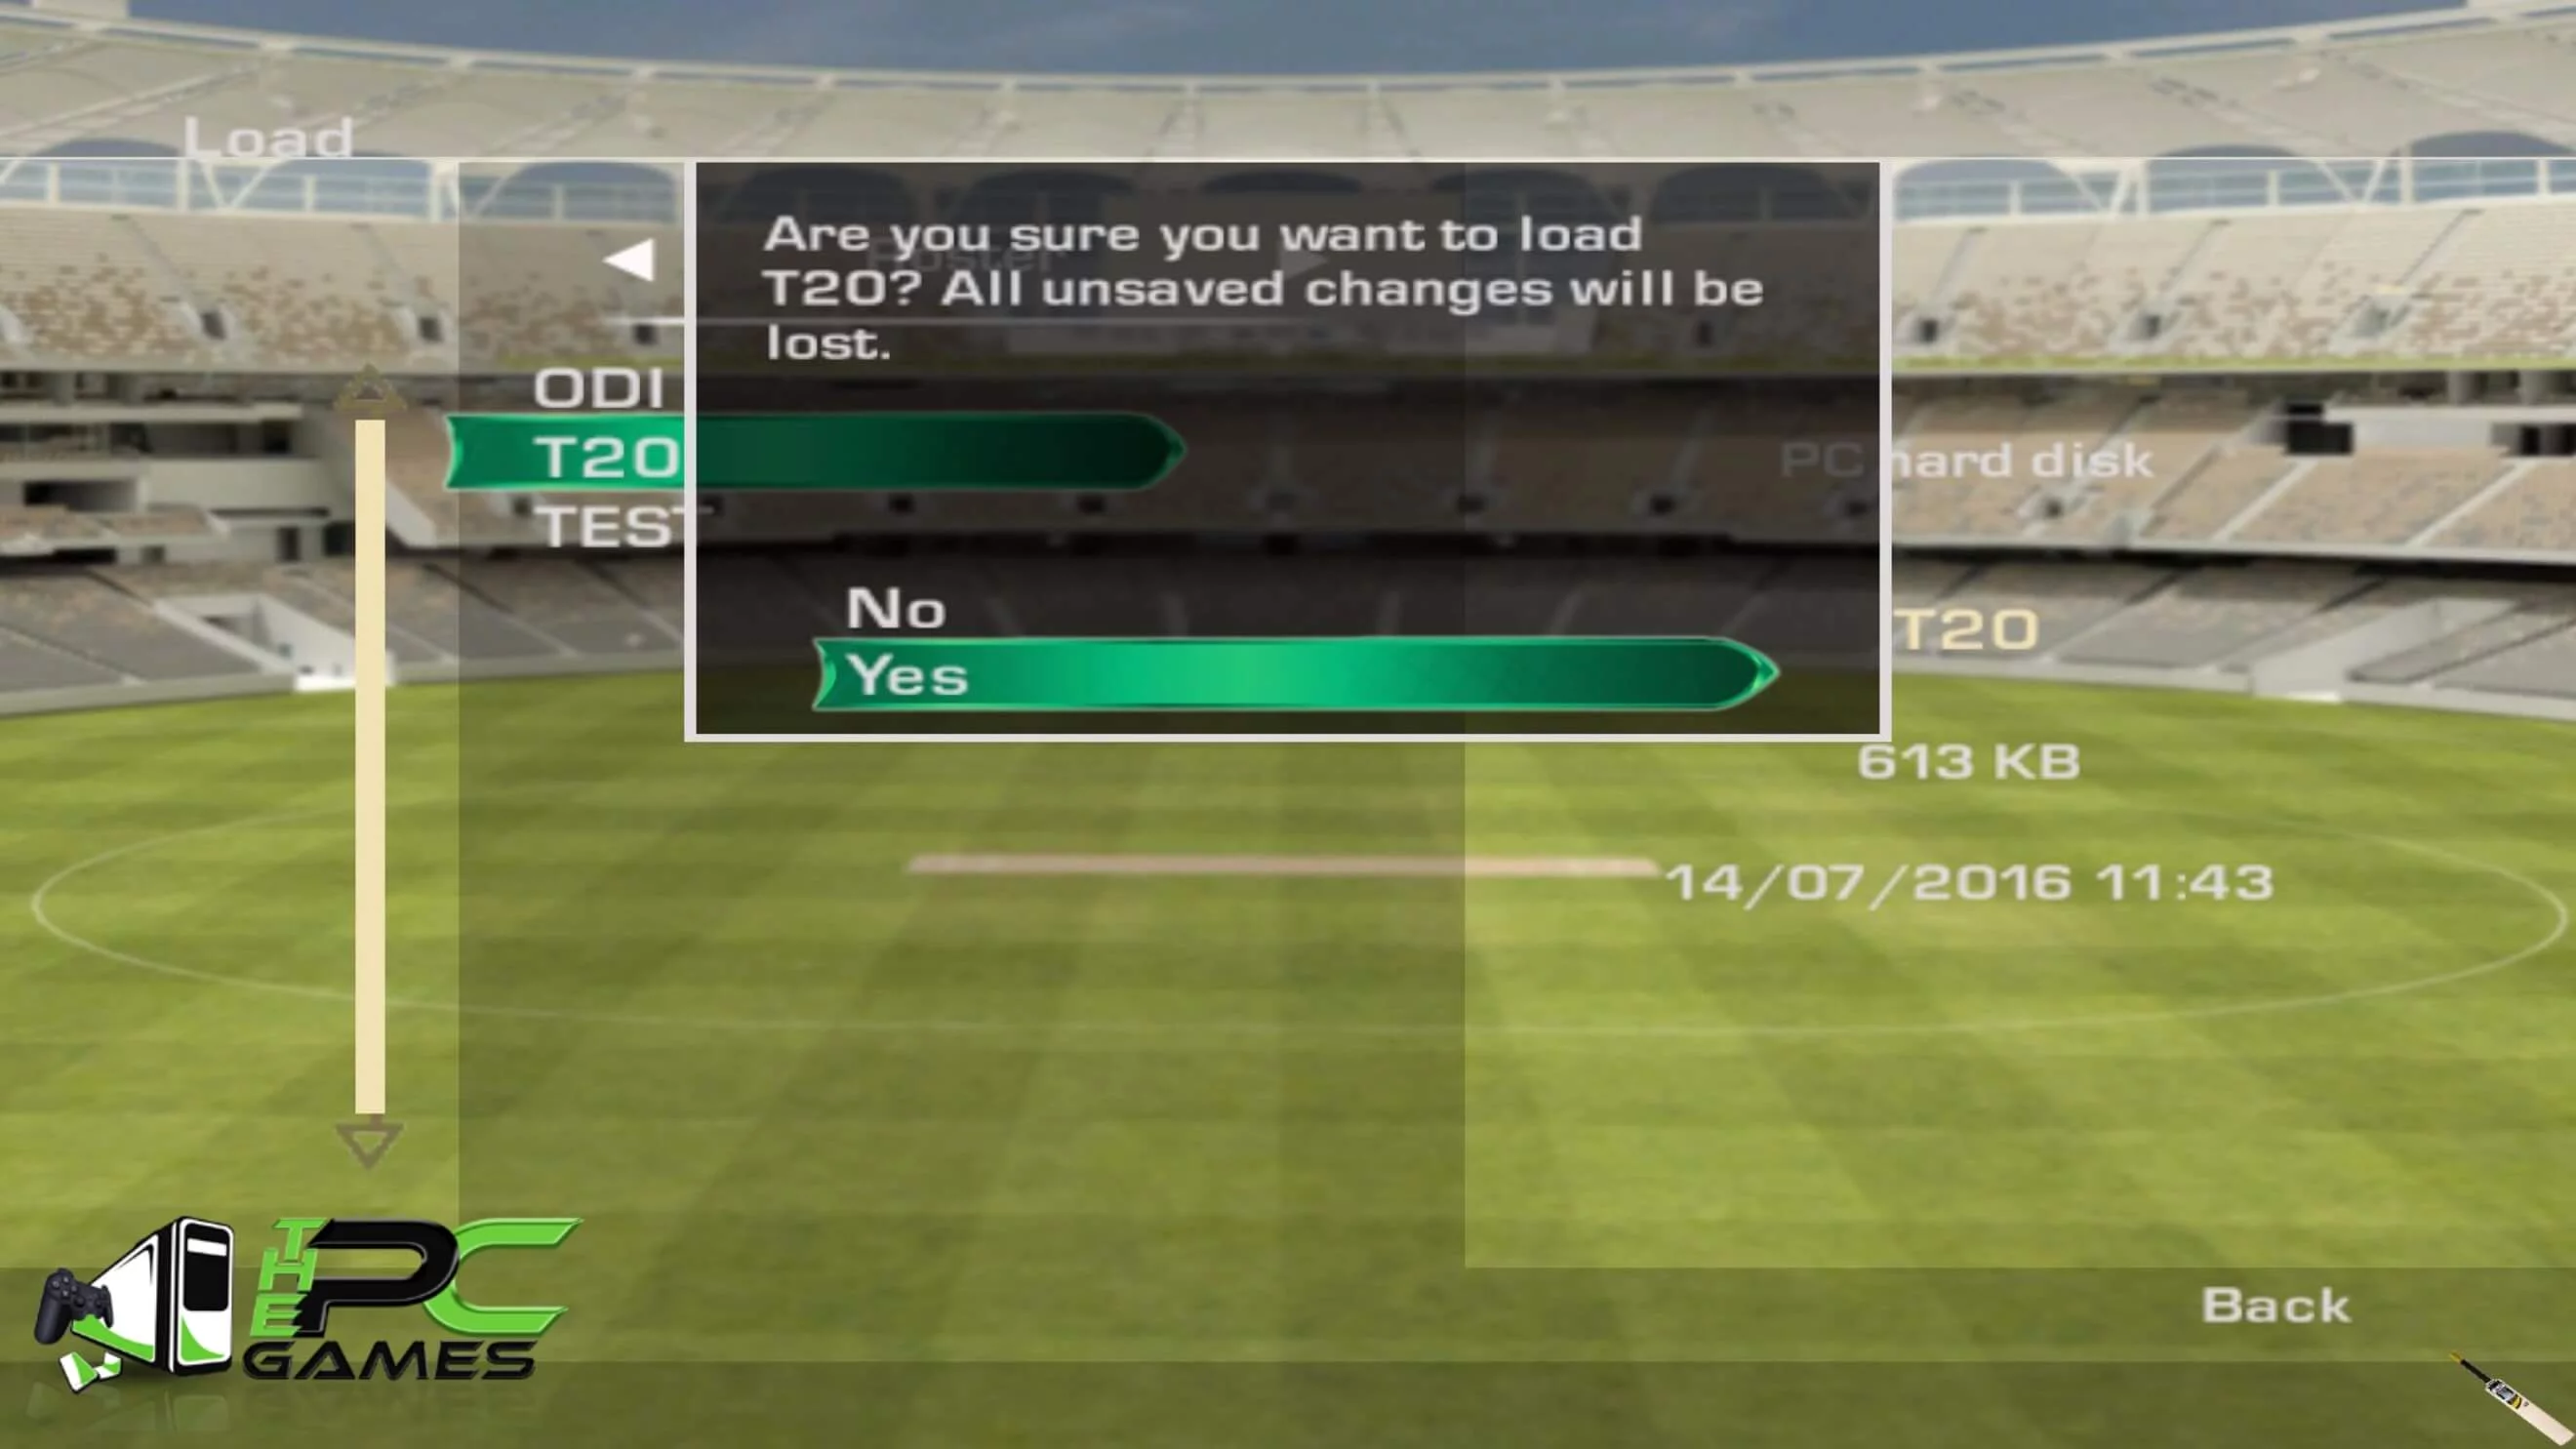 How to Load Roster (T20-ODI-Test) Tutorial (5)